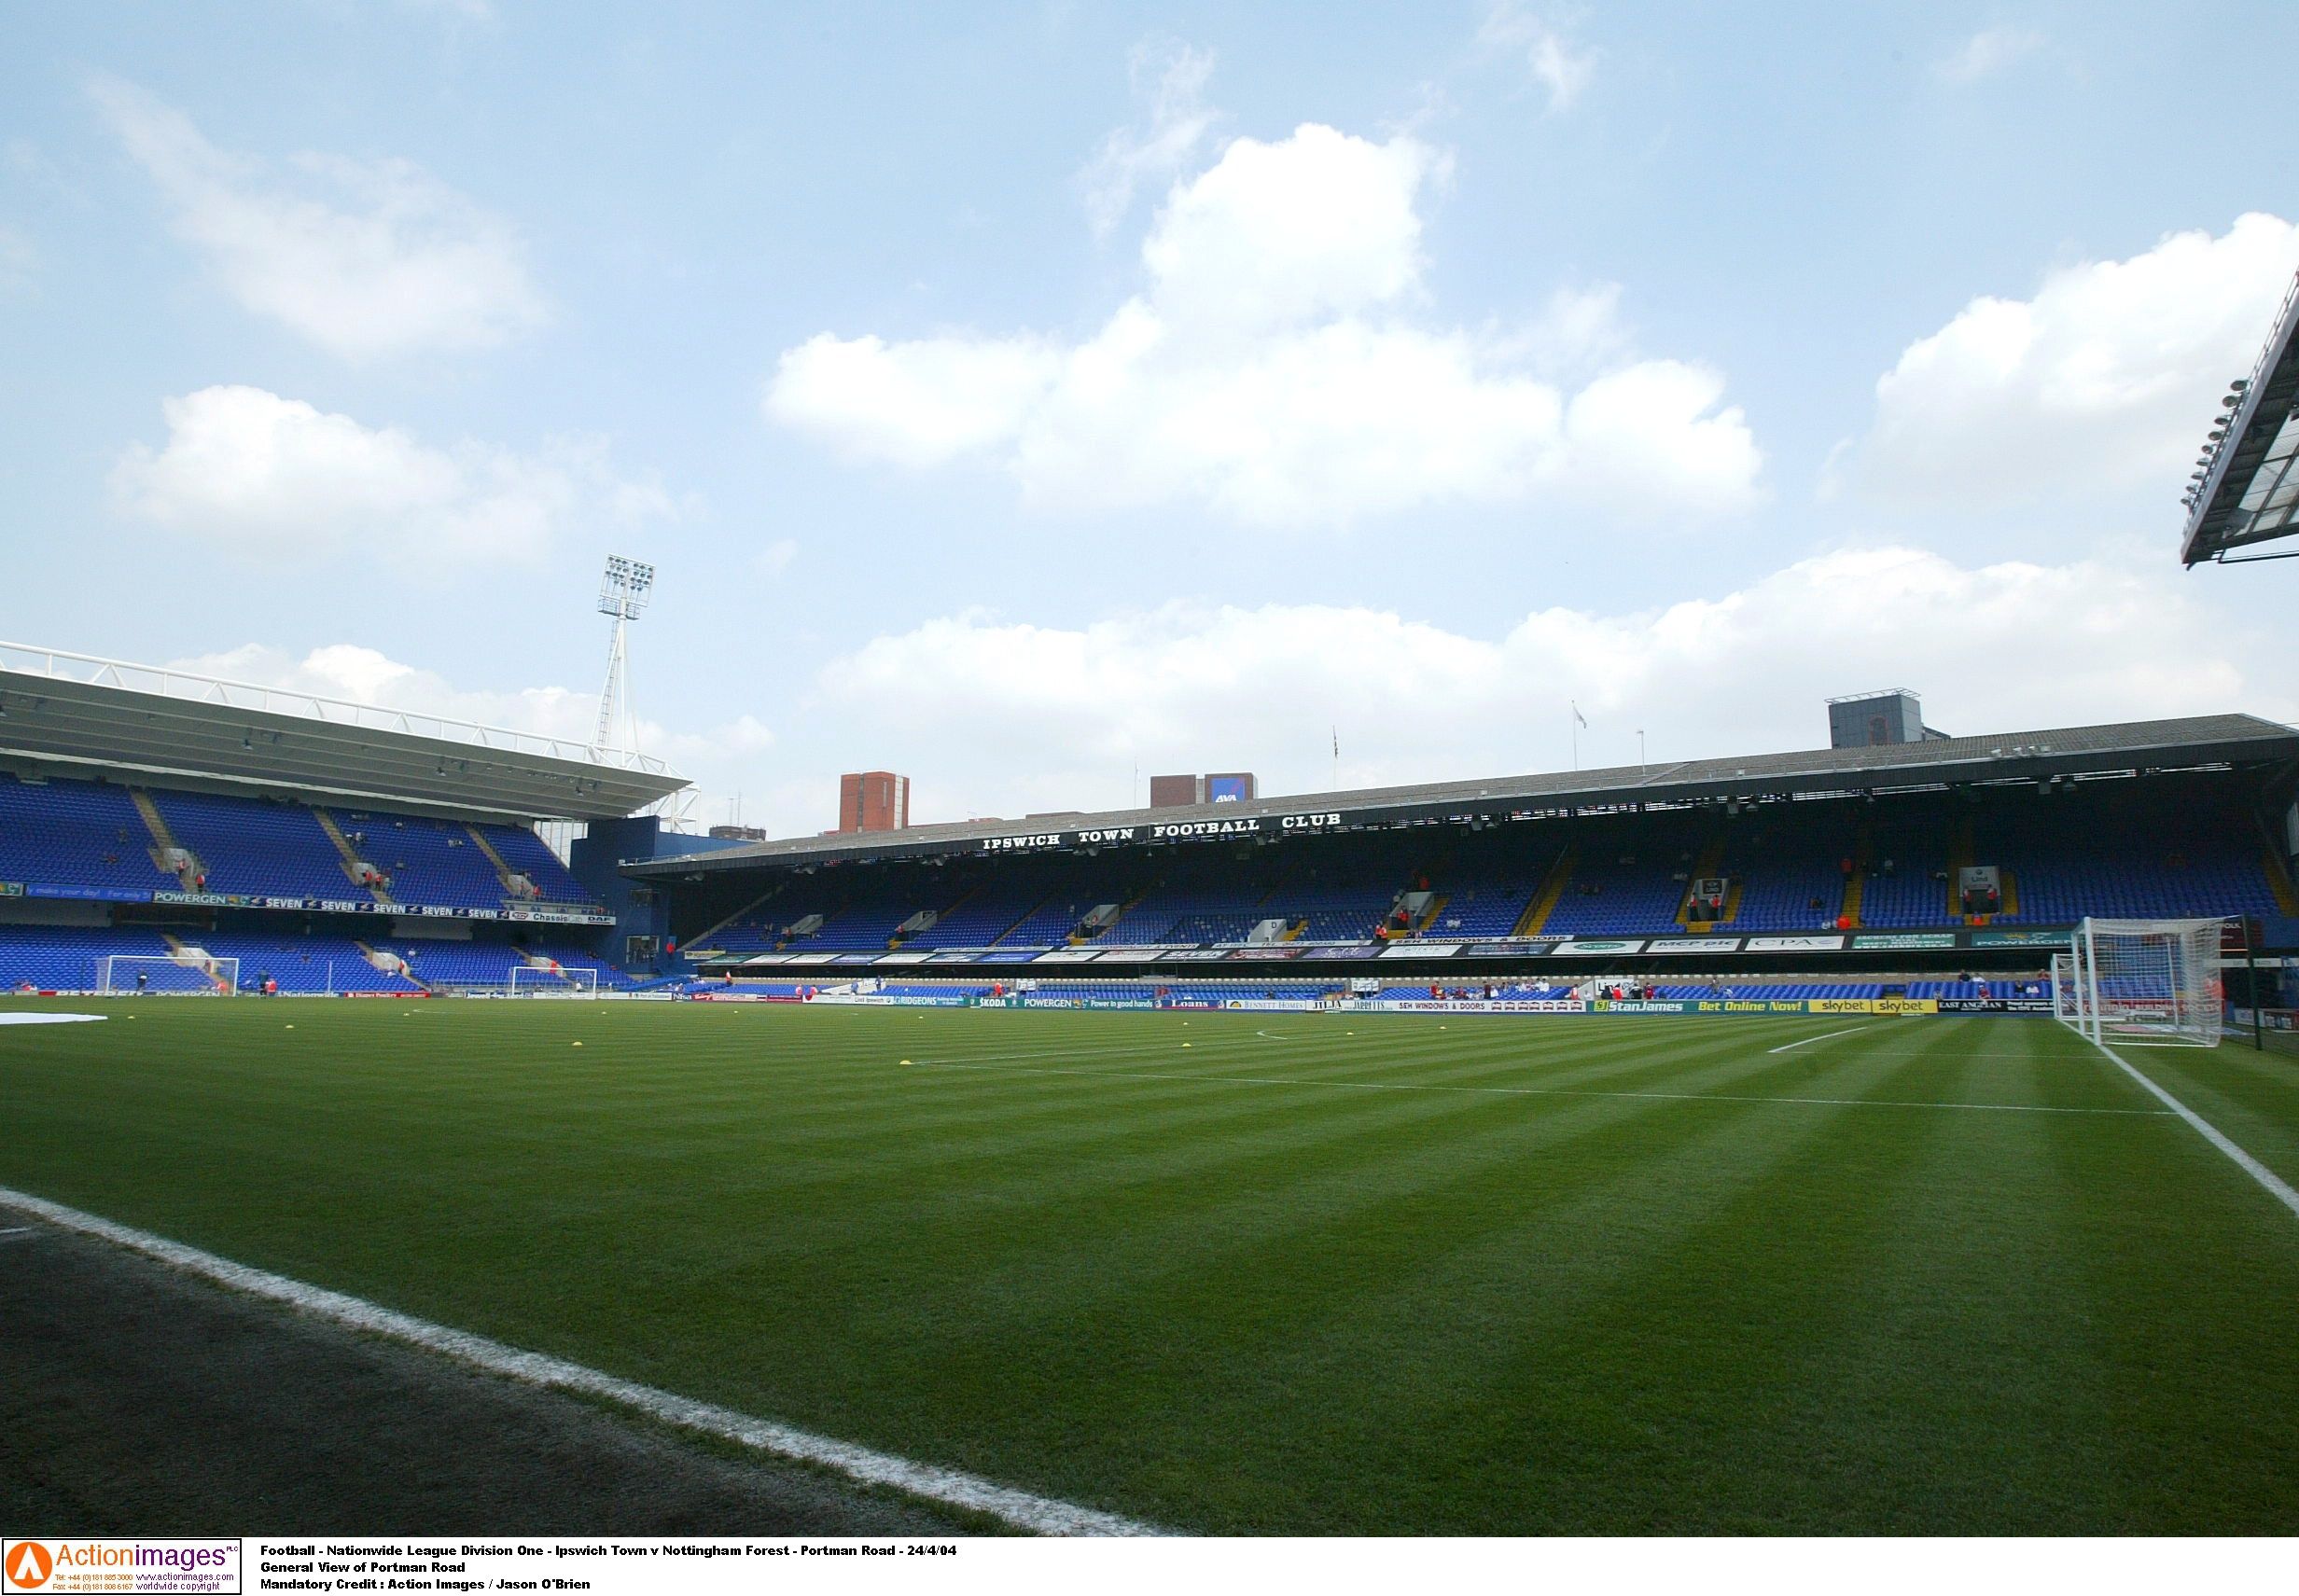 Football - Nationwide League Division One - Ipswich Town v Nottingham Forest - Portman Road - 24/4/04 
General View of Portman Road 
Mandatory Credit : Action Images / Jason O'Brien